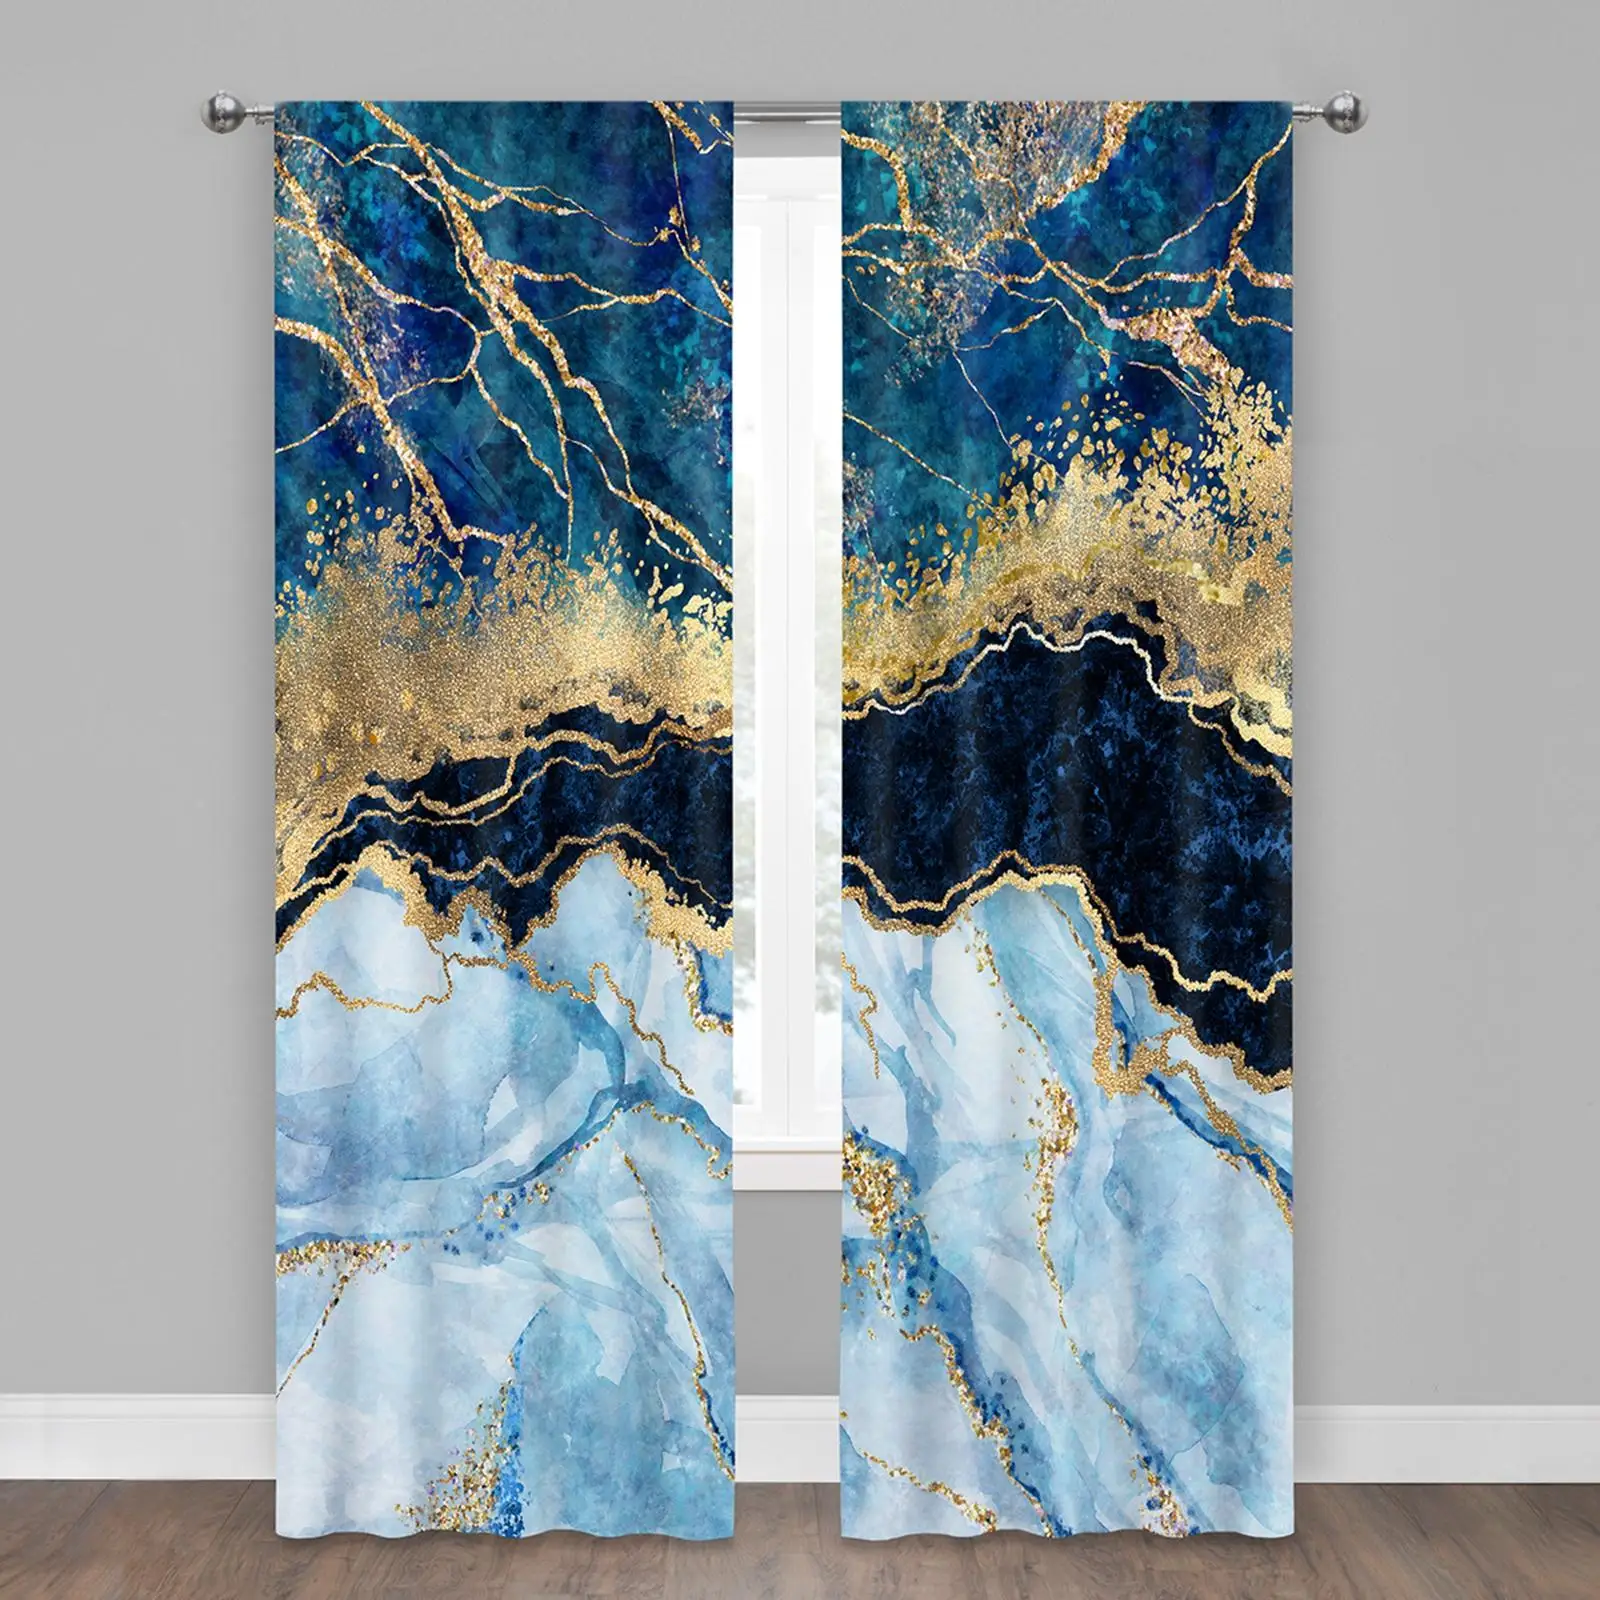 2Pcs Polyester Curtain Panels Washable Decorative Window Treatment Window Draperies for Bedroom Hotel Decoration